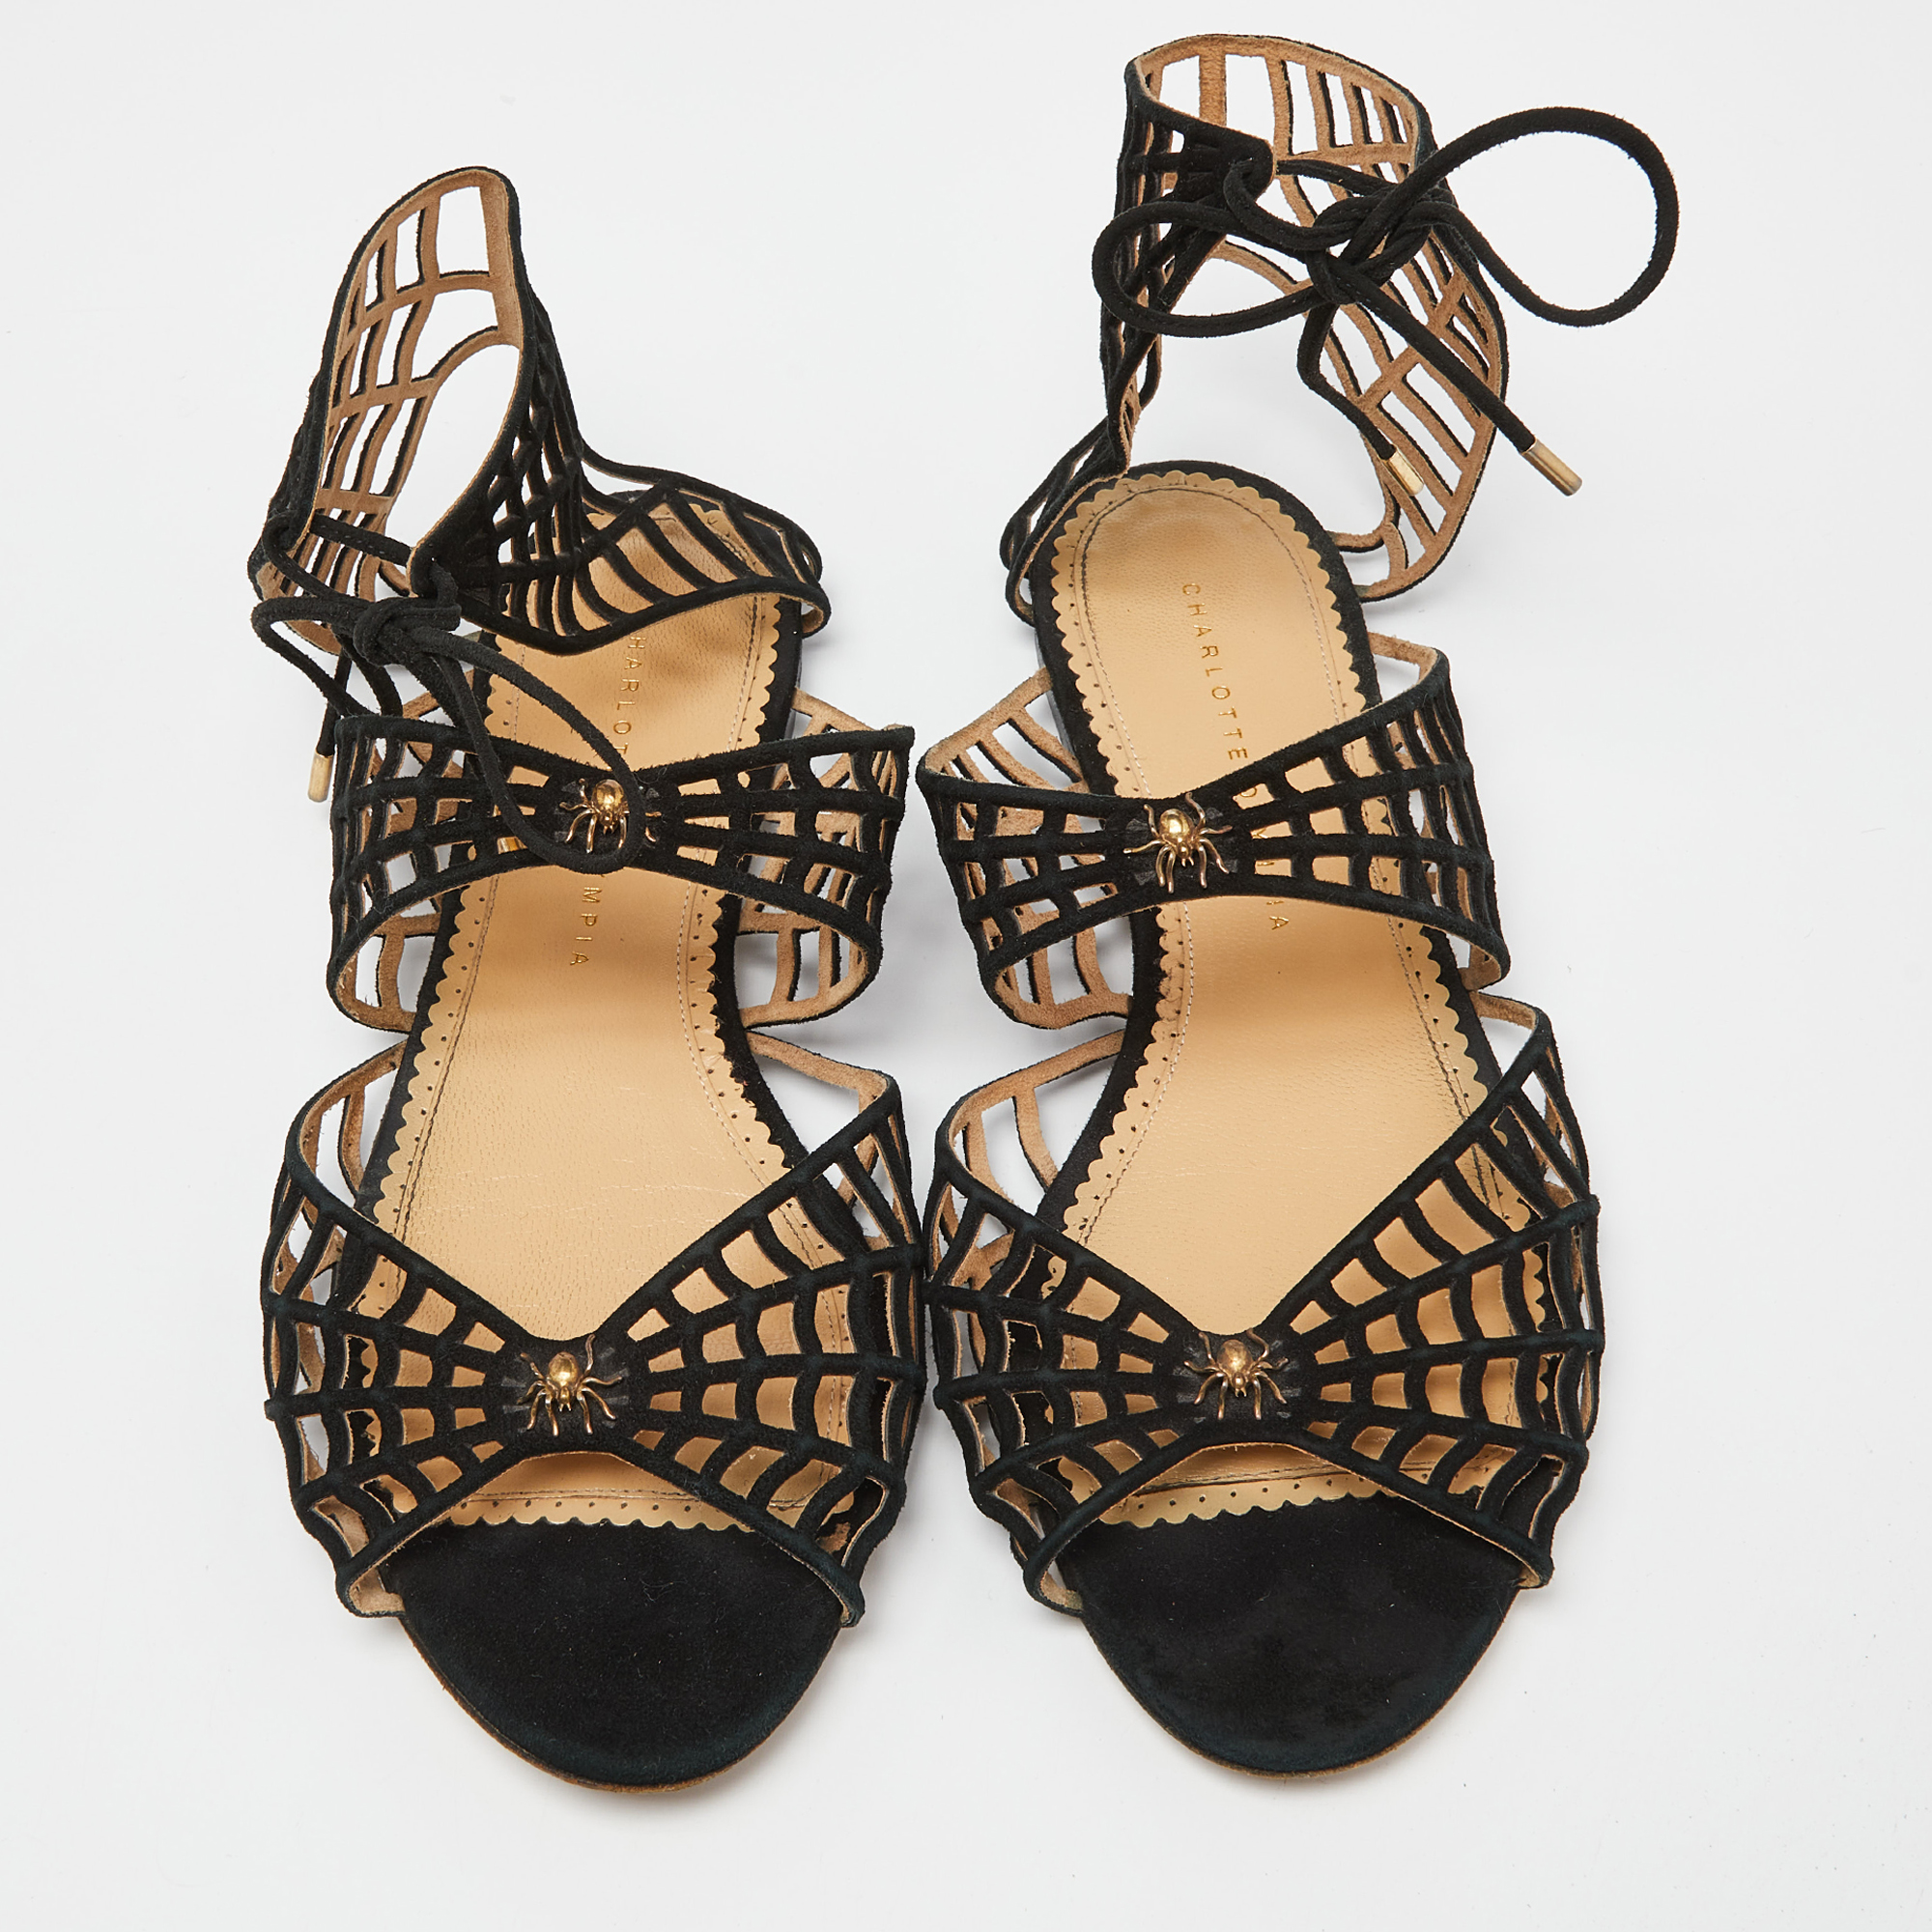 Charlotte Olympia Black Suede Miss Muffet Flat Sandals Size 41